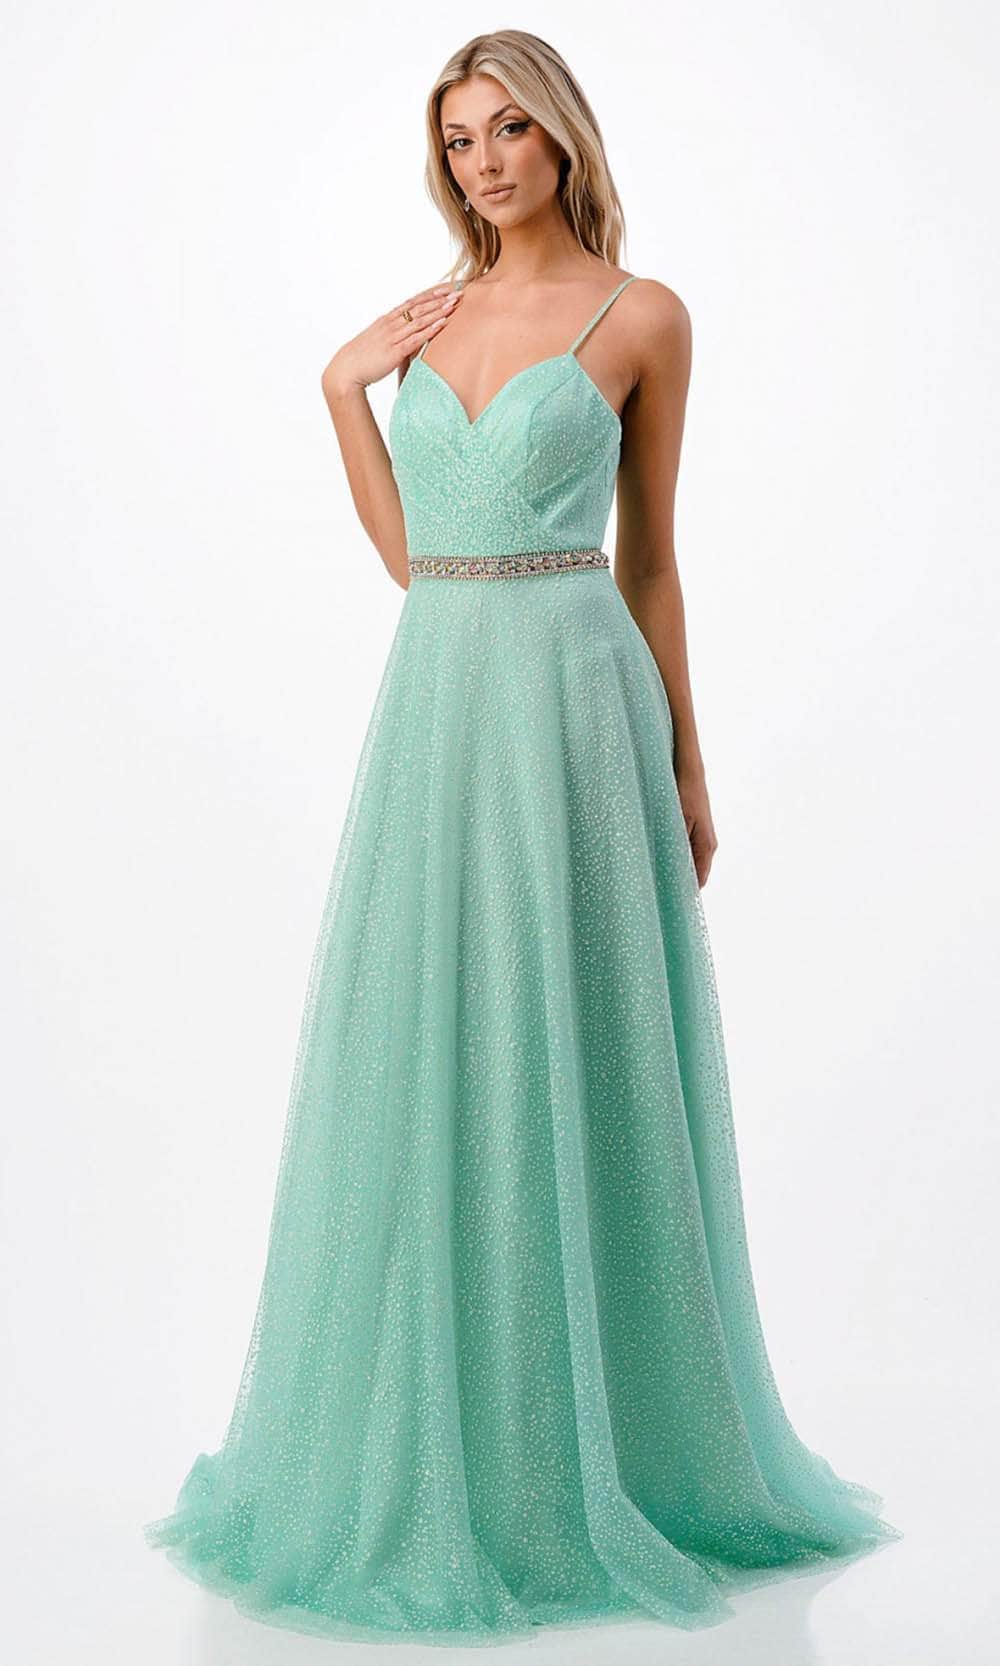 Image of Aspeed Design P2105 - Spaghetti Straps Beaded Prom Gown